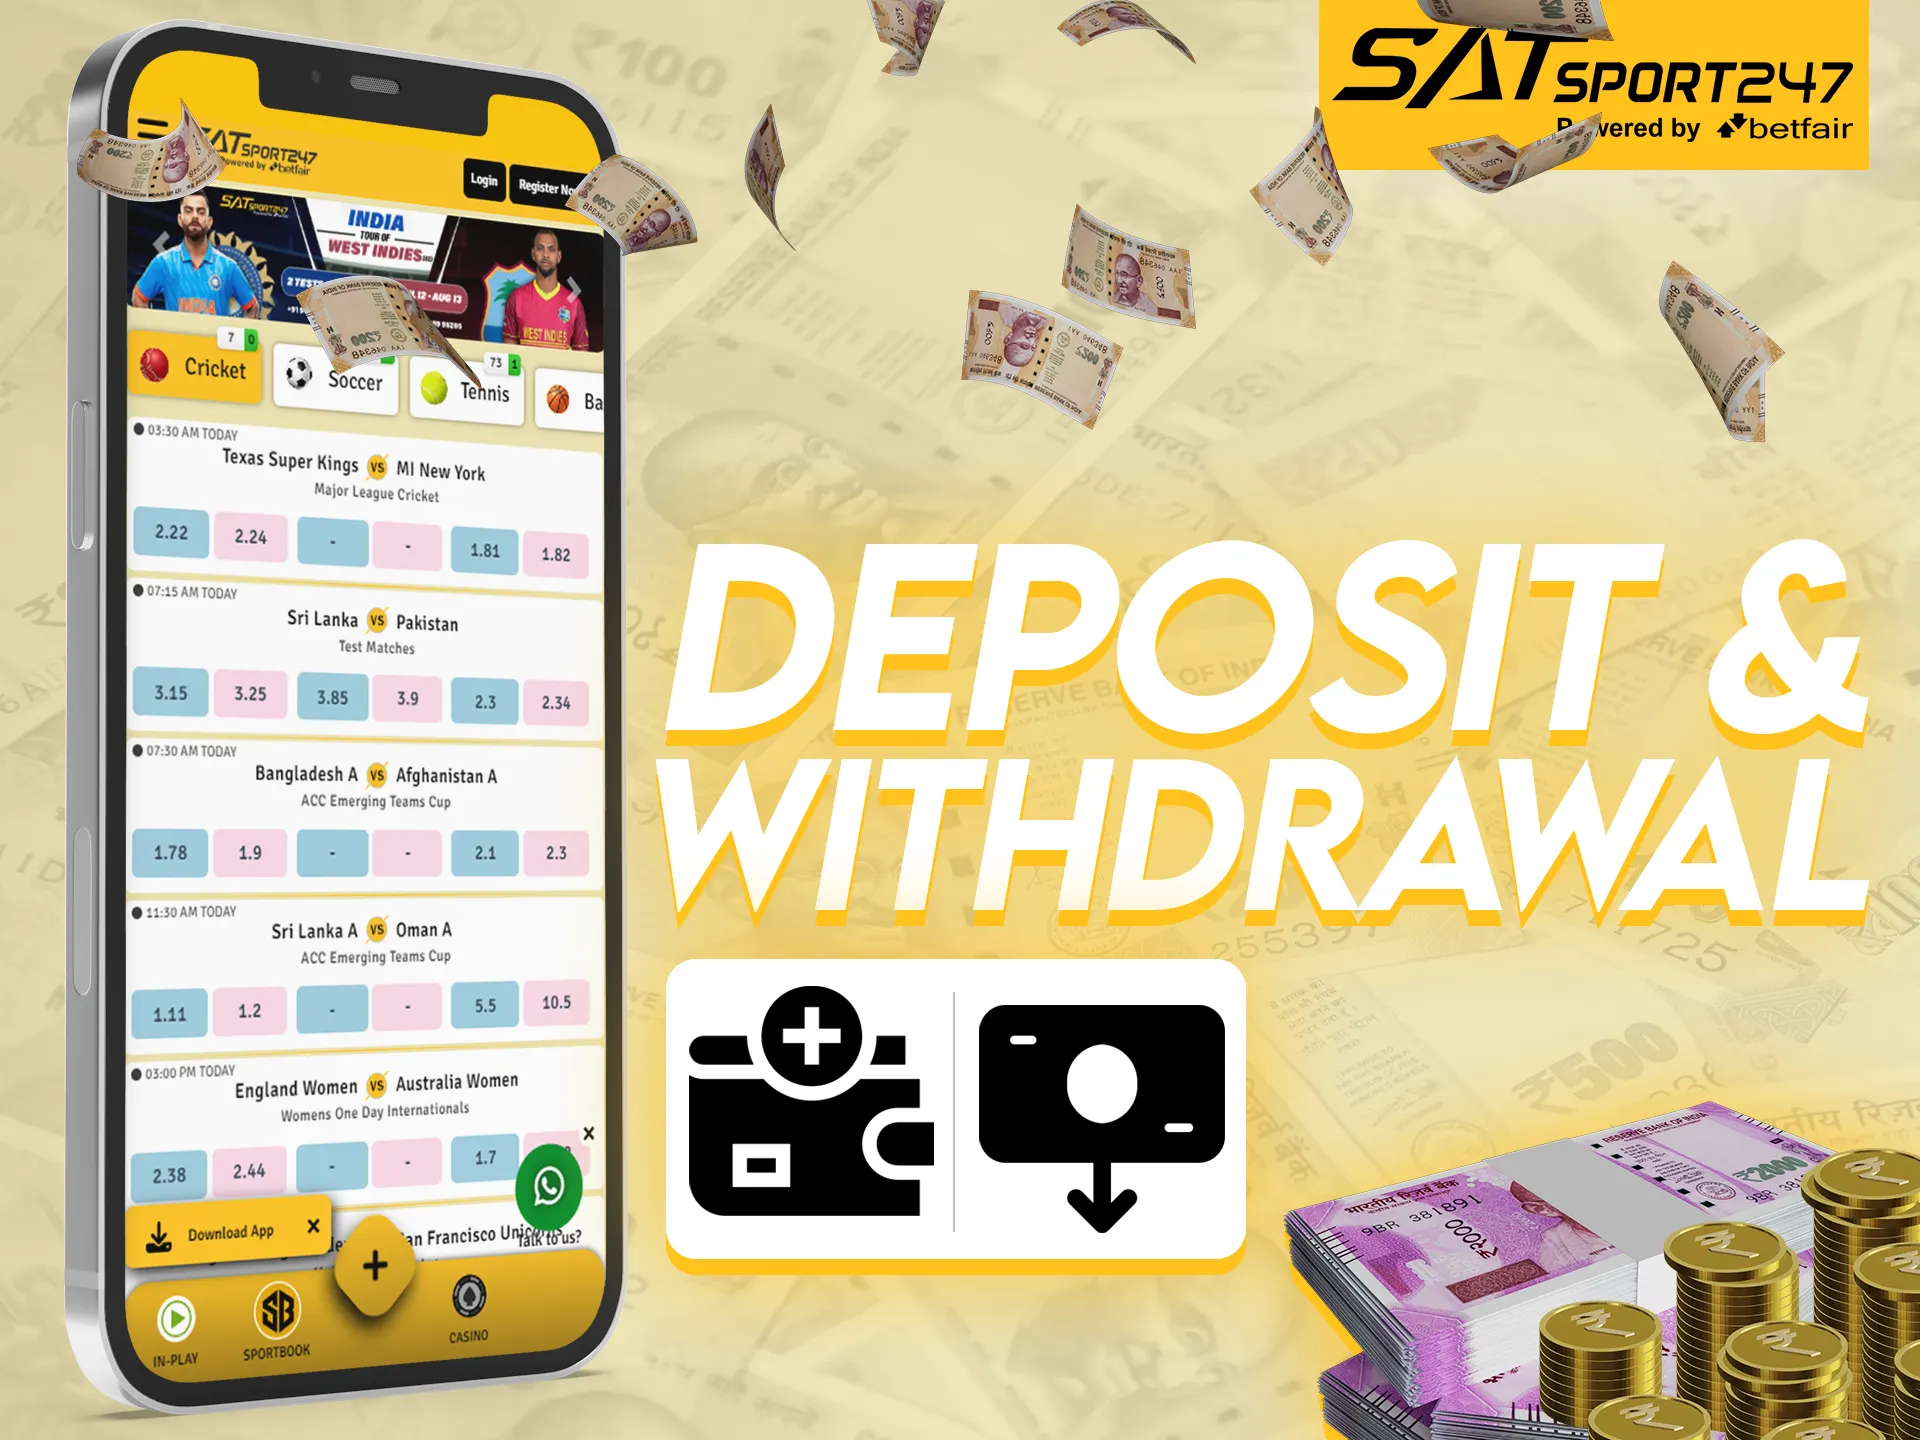 There are various deposit and withdrawal methods available in the Satsport247 app.